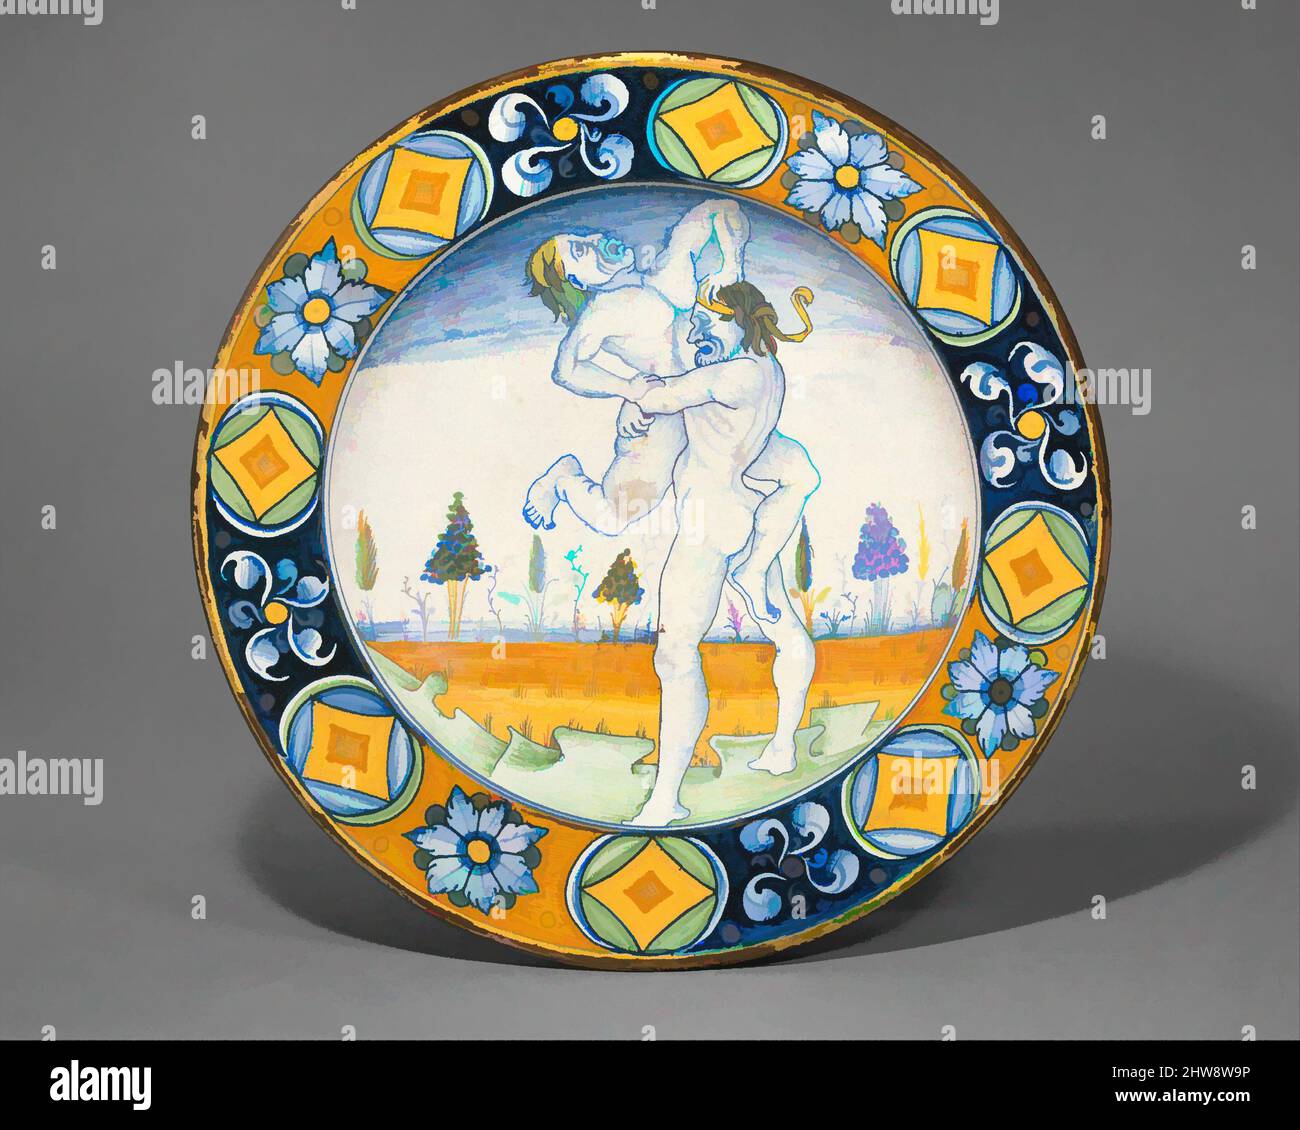 Art inspired by Dish (piatto); The story of Hercules: Hercules lifts the giant Antaeus clear of the Earth, his mother, from whom he derived his phenomenal strength, ca. 1490–1500, Italian, Deruta, Maiolica (tin-glazed earthenware), Diameter: 17 in. (43.2cm), Ceramics-Pottery, Classic works modernized by Artotop with a splash of modernity. Shapes, color and value, eye-catching visual impact on art. Emotions through freedom of artworks in a contemporary way. A timeless message pursuing a wildly creative new direction. Artists turning to the digital medium and creating the Artotop NFT Stock Photo